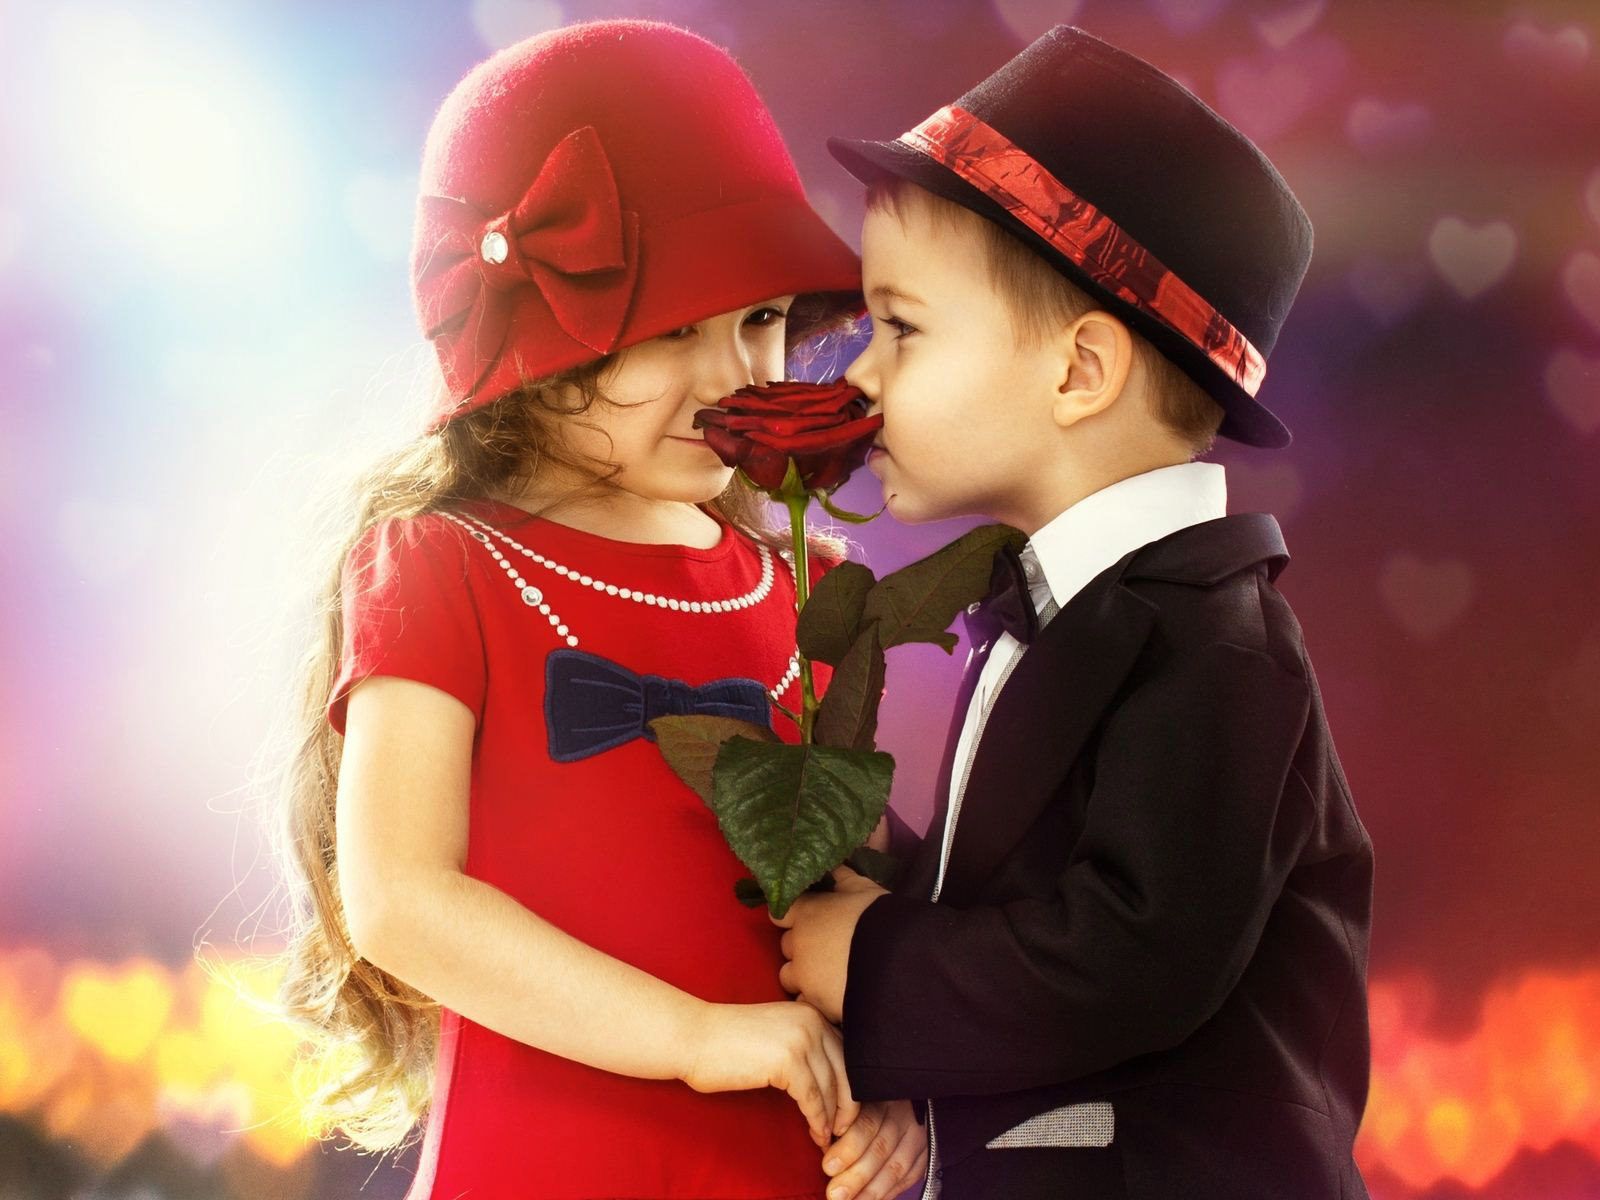 Boy And Girl Wallpapers 70 images